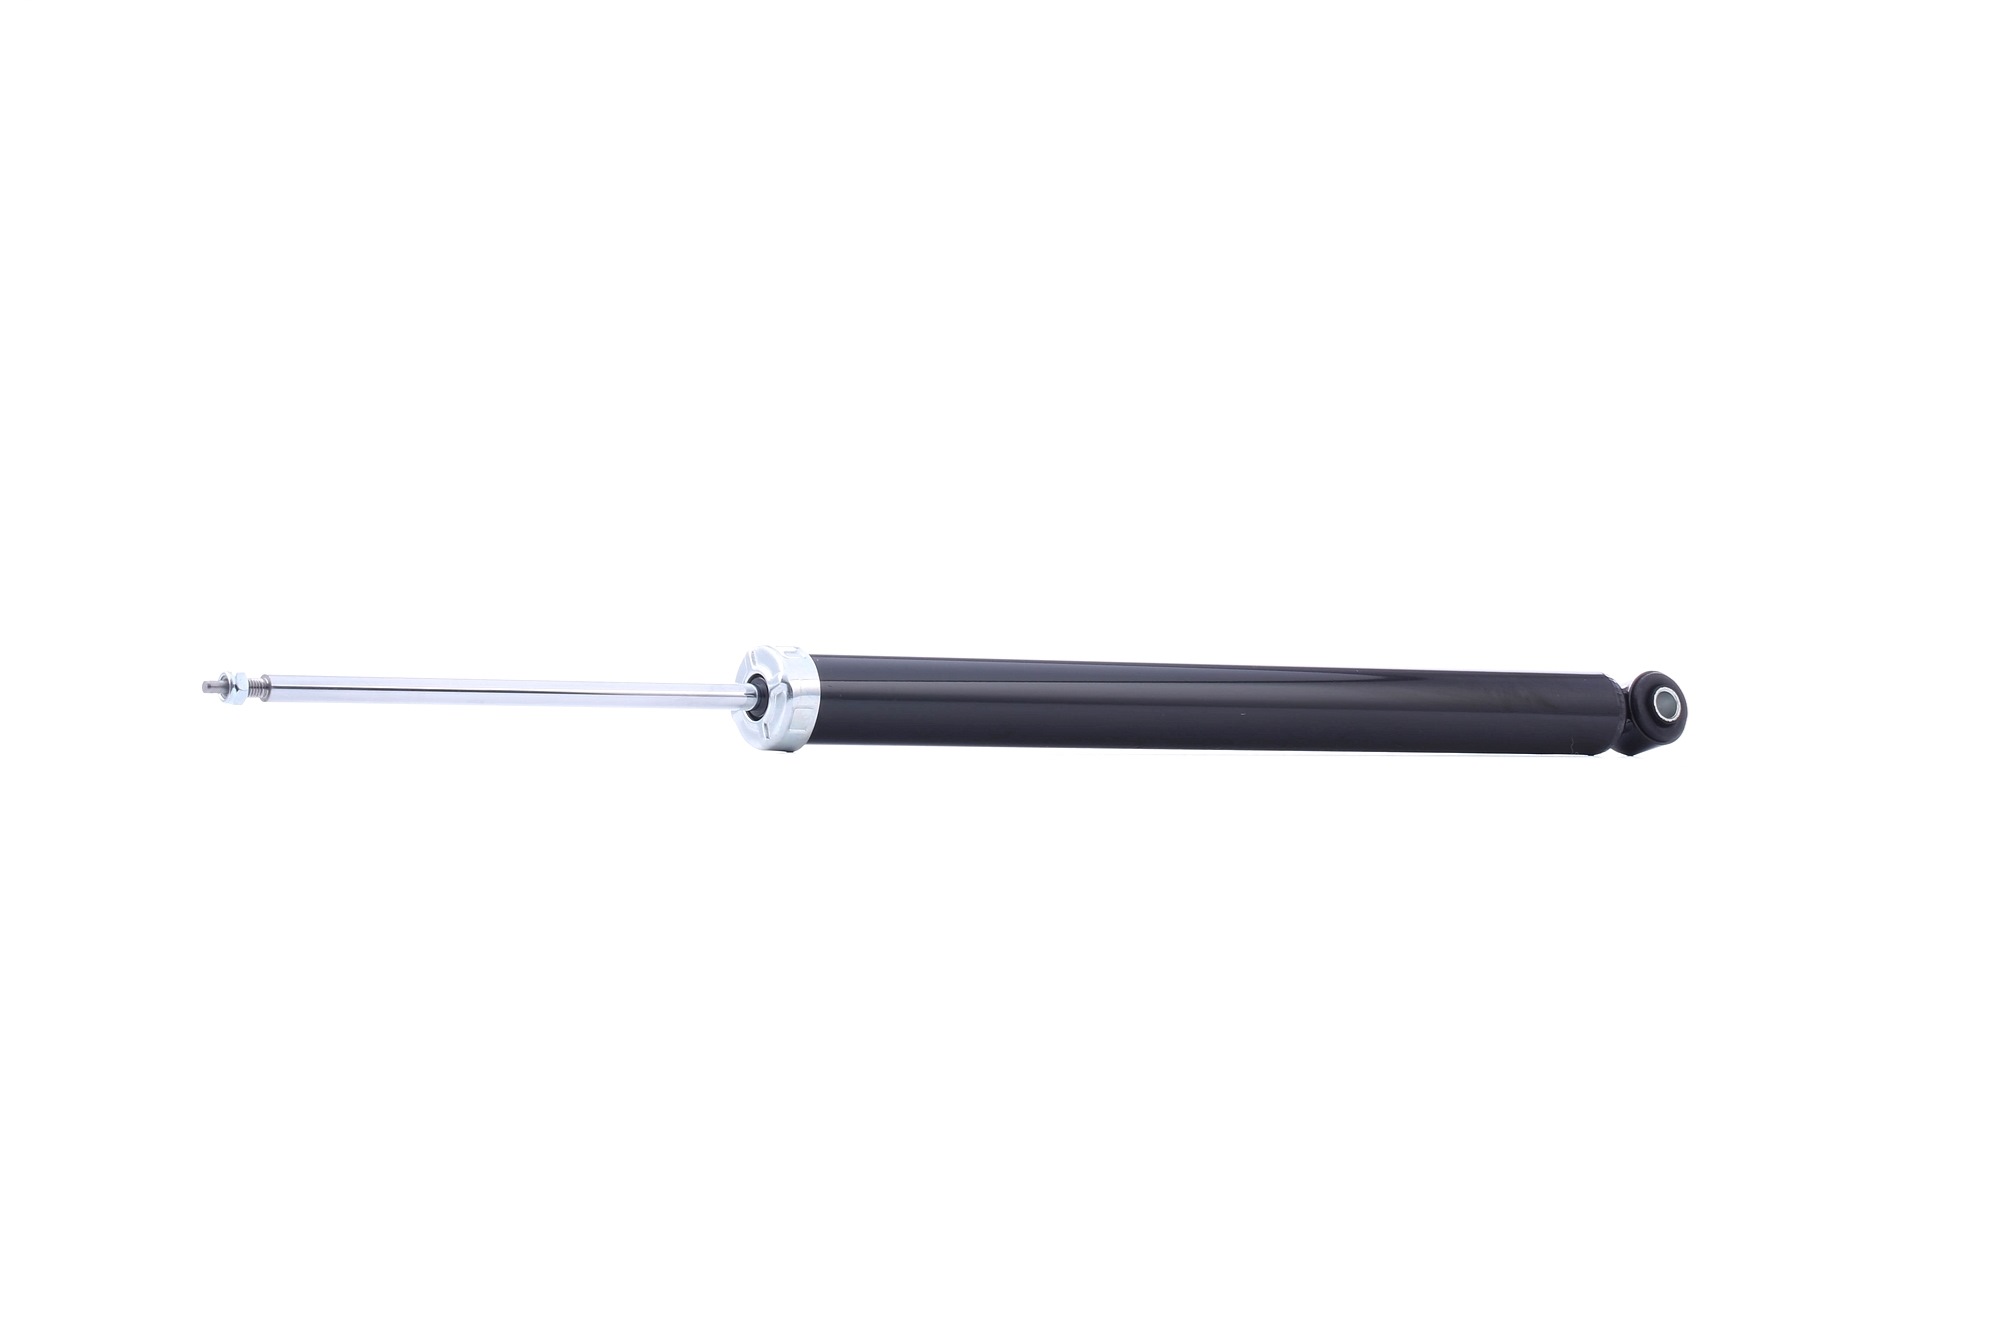 Buy Shock absorber RIDEX 854S0087 - Damping parts Ford Focus Mk3 online